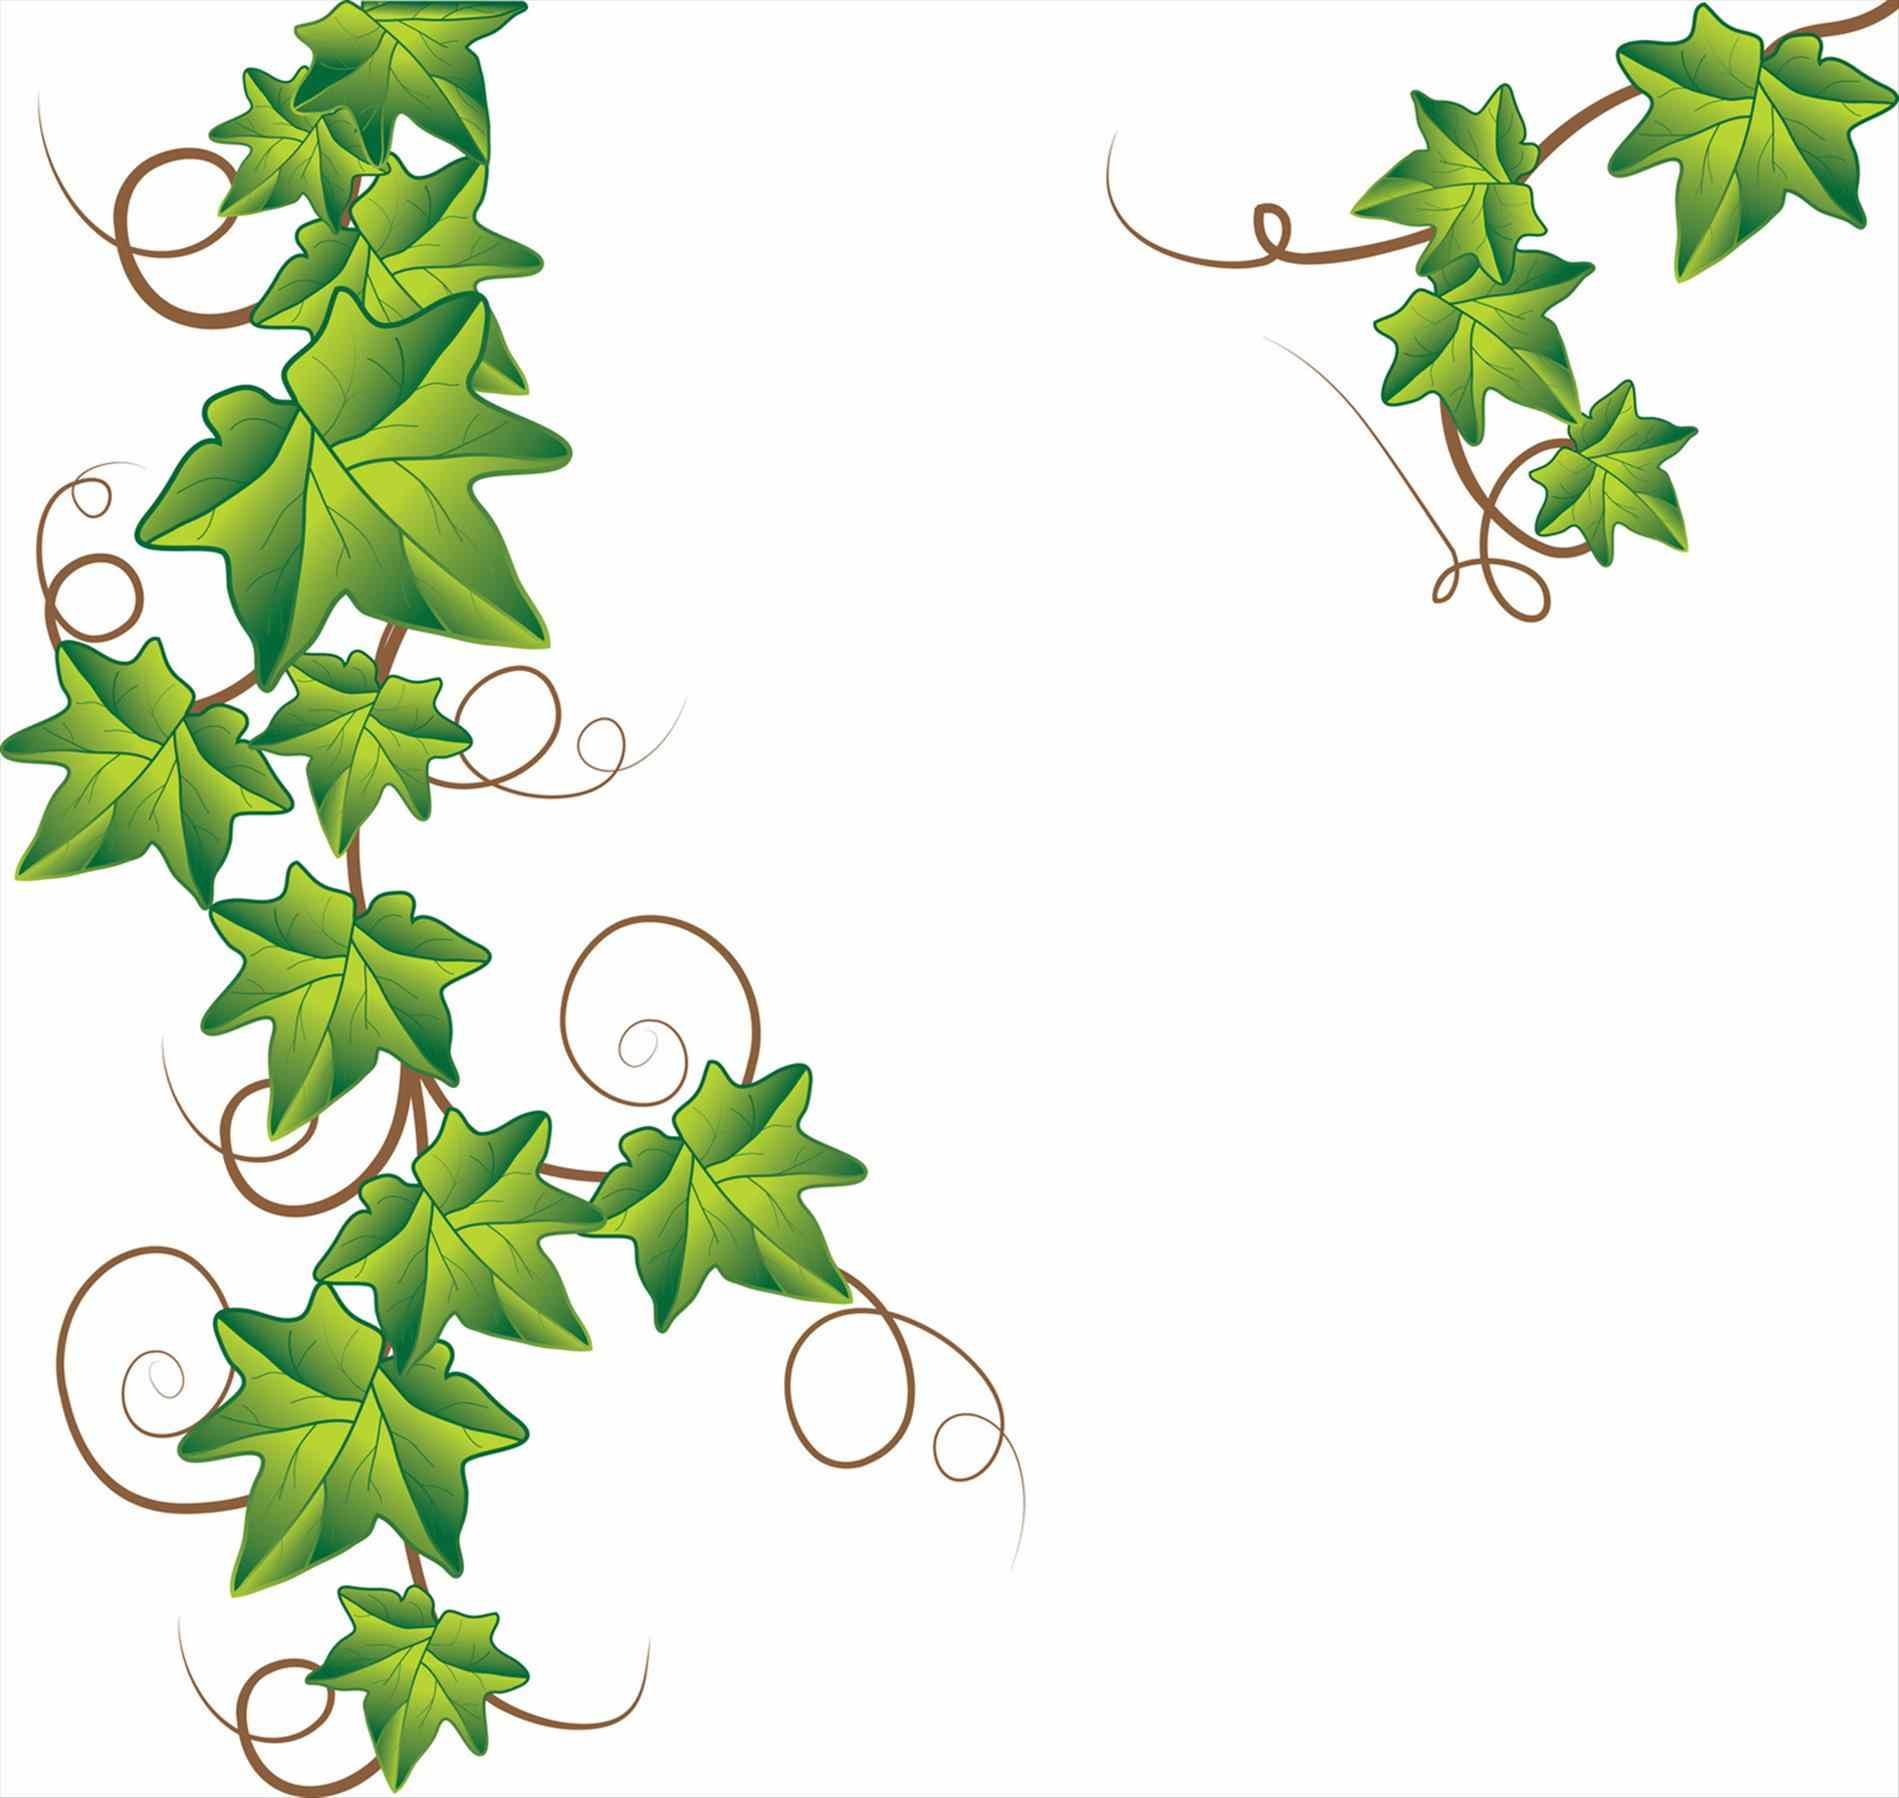 Ivy poison ivy plant drawing plant clip art clipart